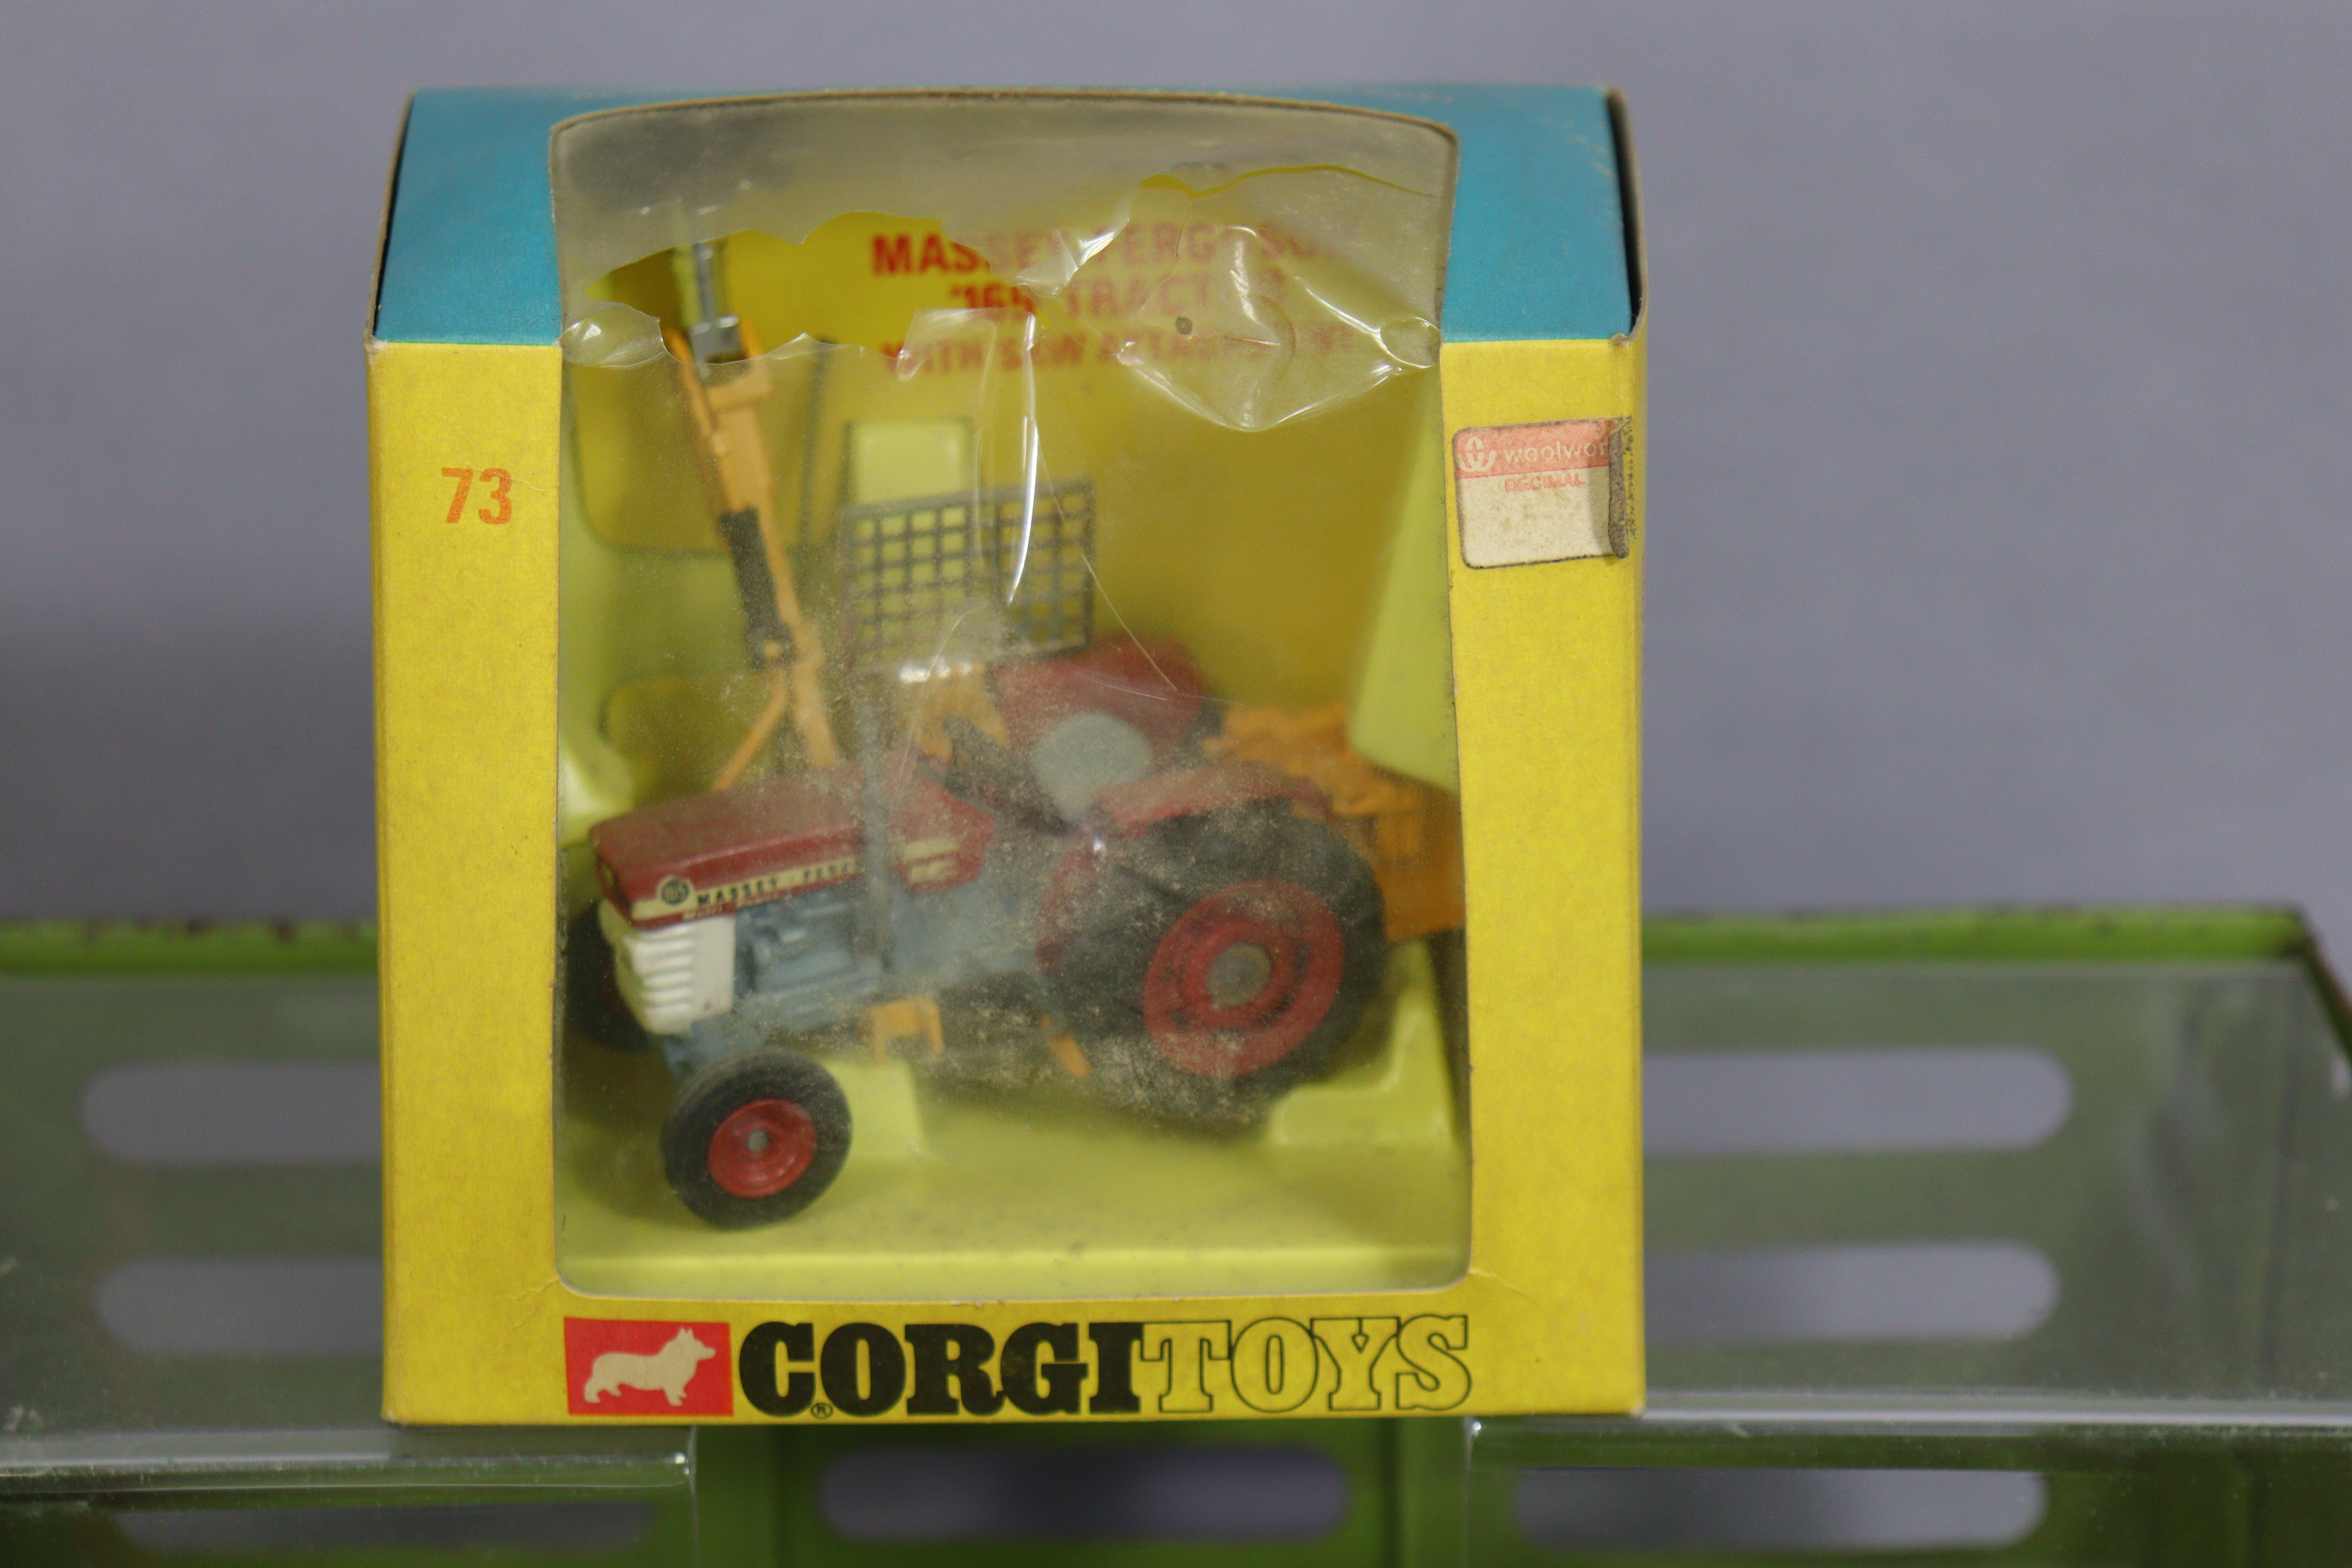 A Corgi die-cast scale model “Massey Ferguson 165 Tractor with saw attachment (No. 73), boxed; - Image 4 of 5